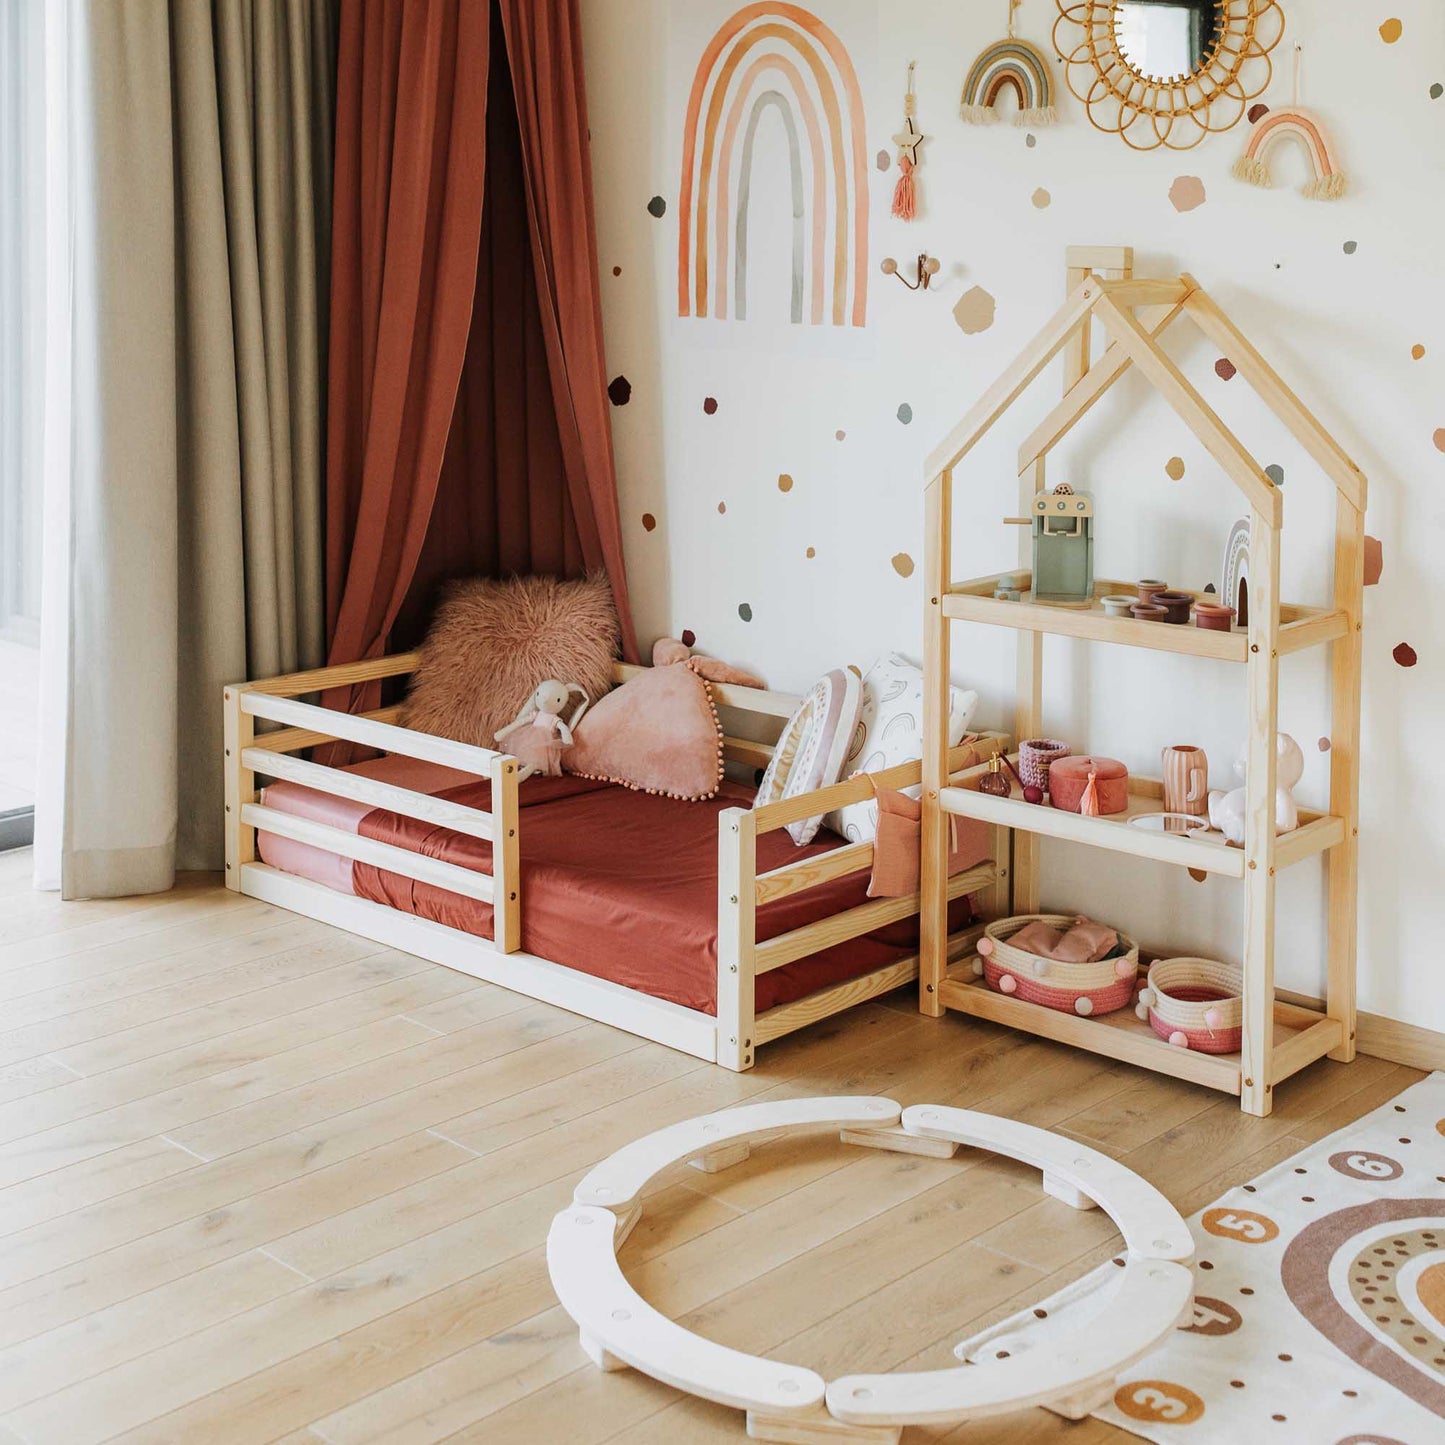 A child's room with a Sweet Home From Wood 2-in-1 transformable kids' bed with a horizontal rail fence, a chair, and a rug.